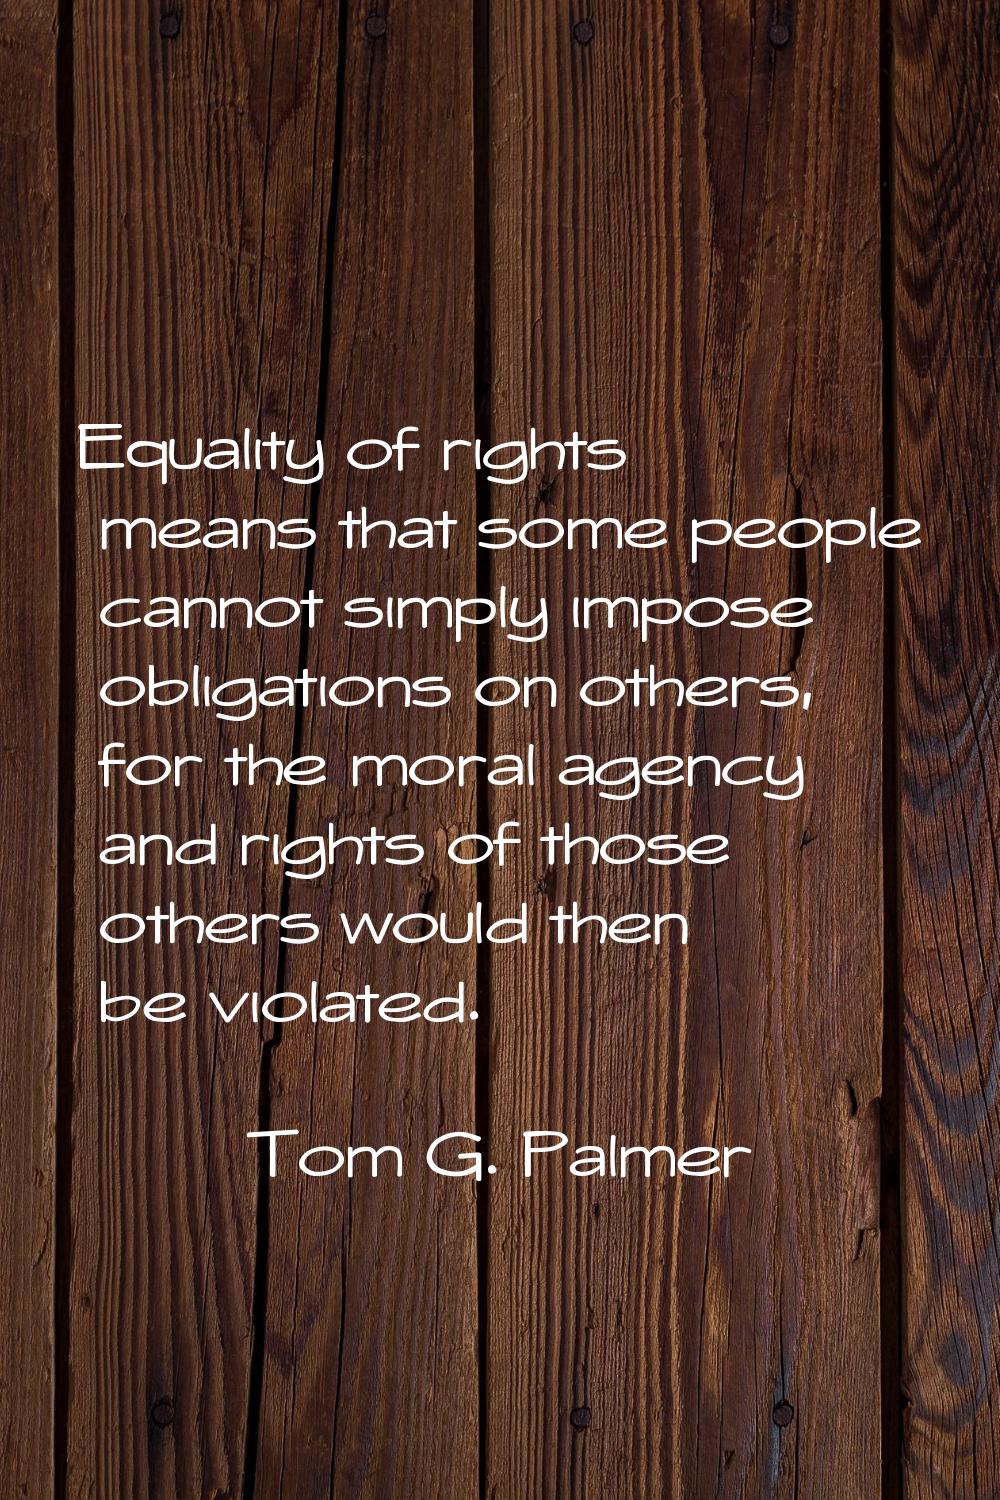 Equality of rights means that some people cannot simply impose obligations on others, for the moral